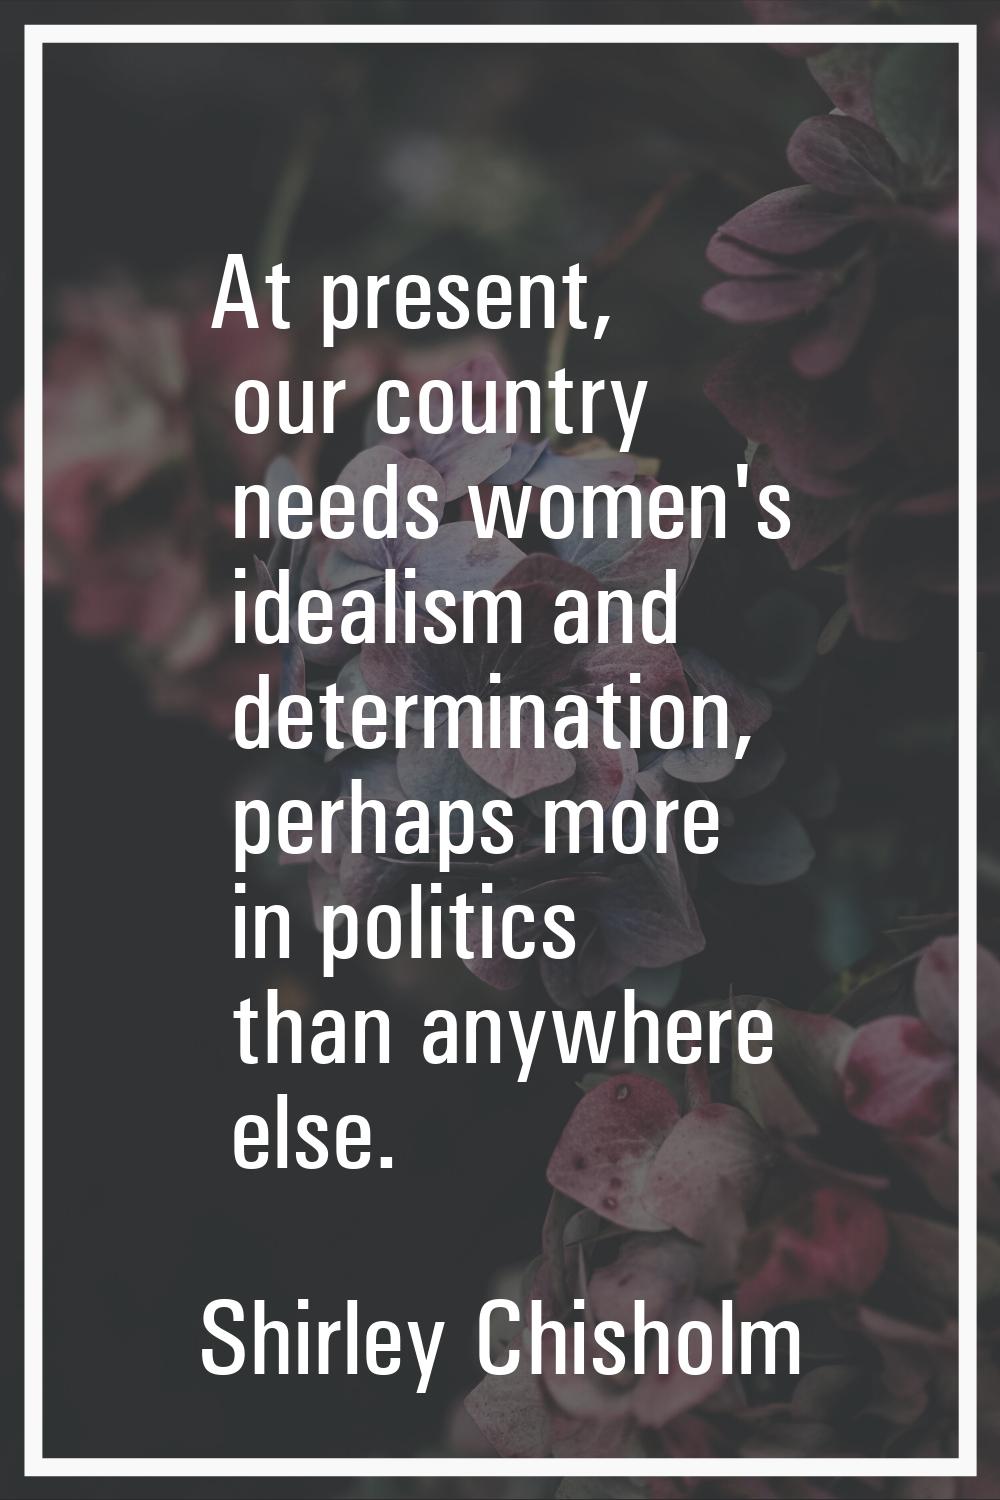 At present, our country needs women's idealism and determination, perhaps more in politics than any